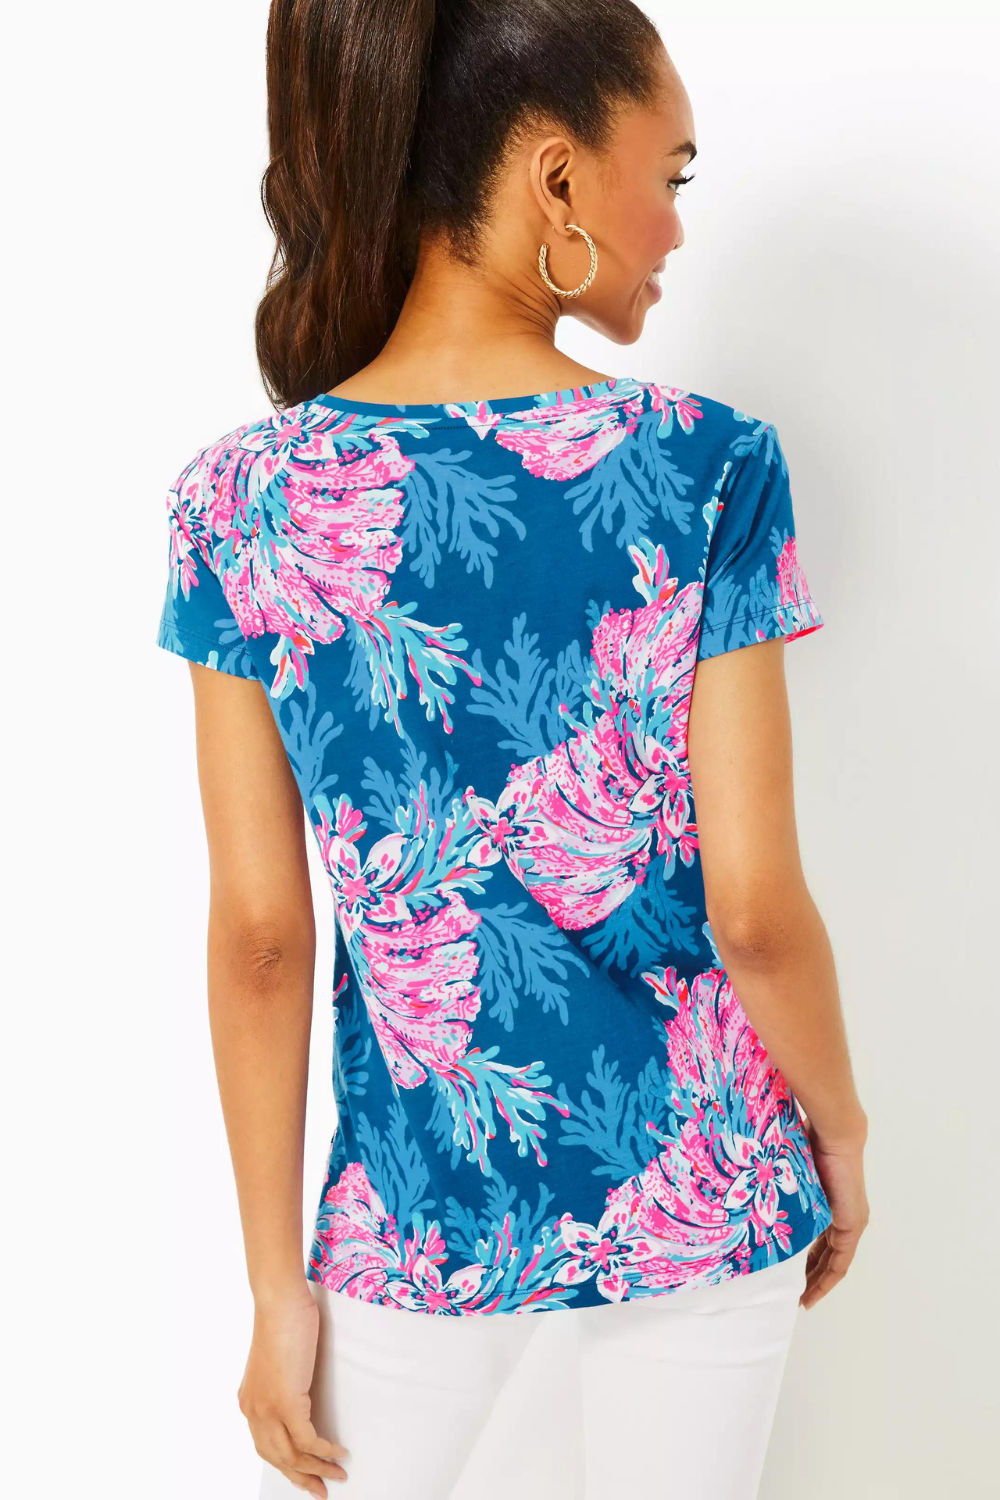 Lilly Pulitzer Meredith Tee - For the Fans